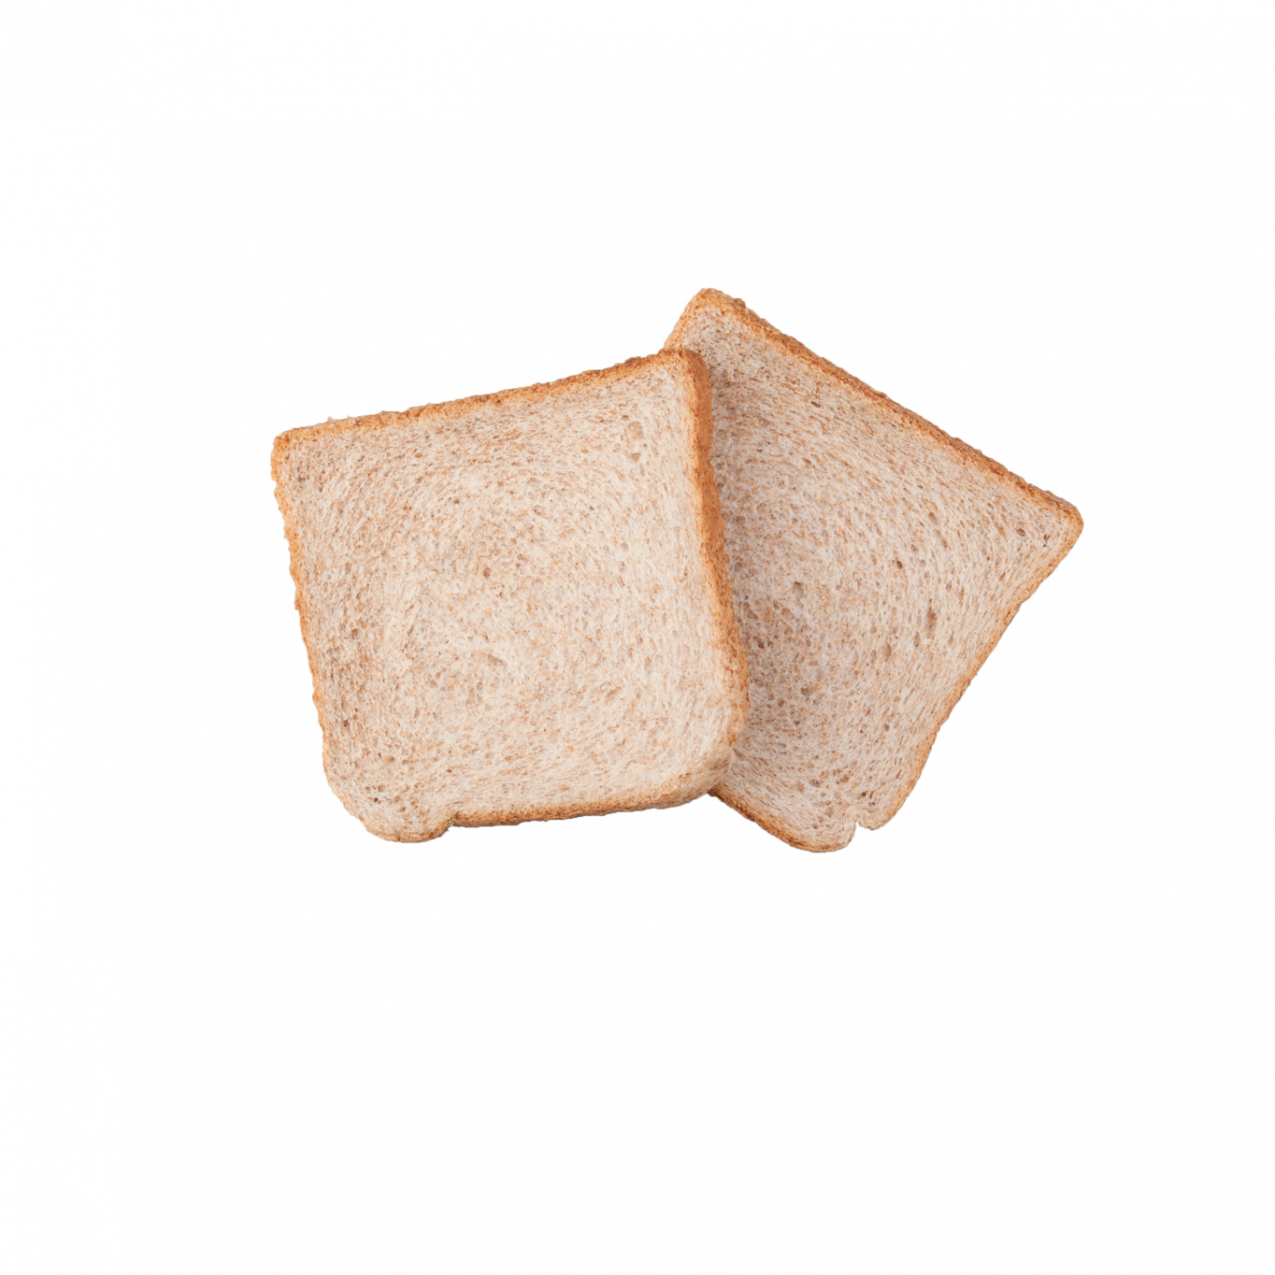 Whole Wheat Bread Transparent Background